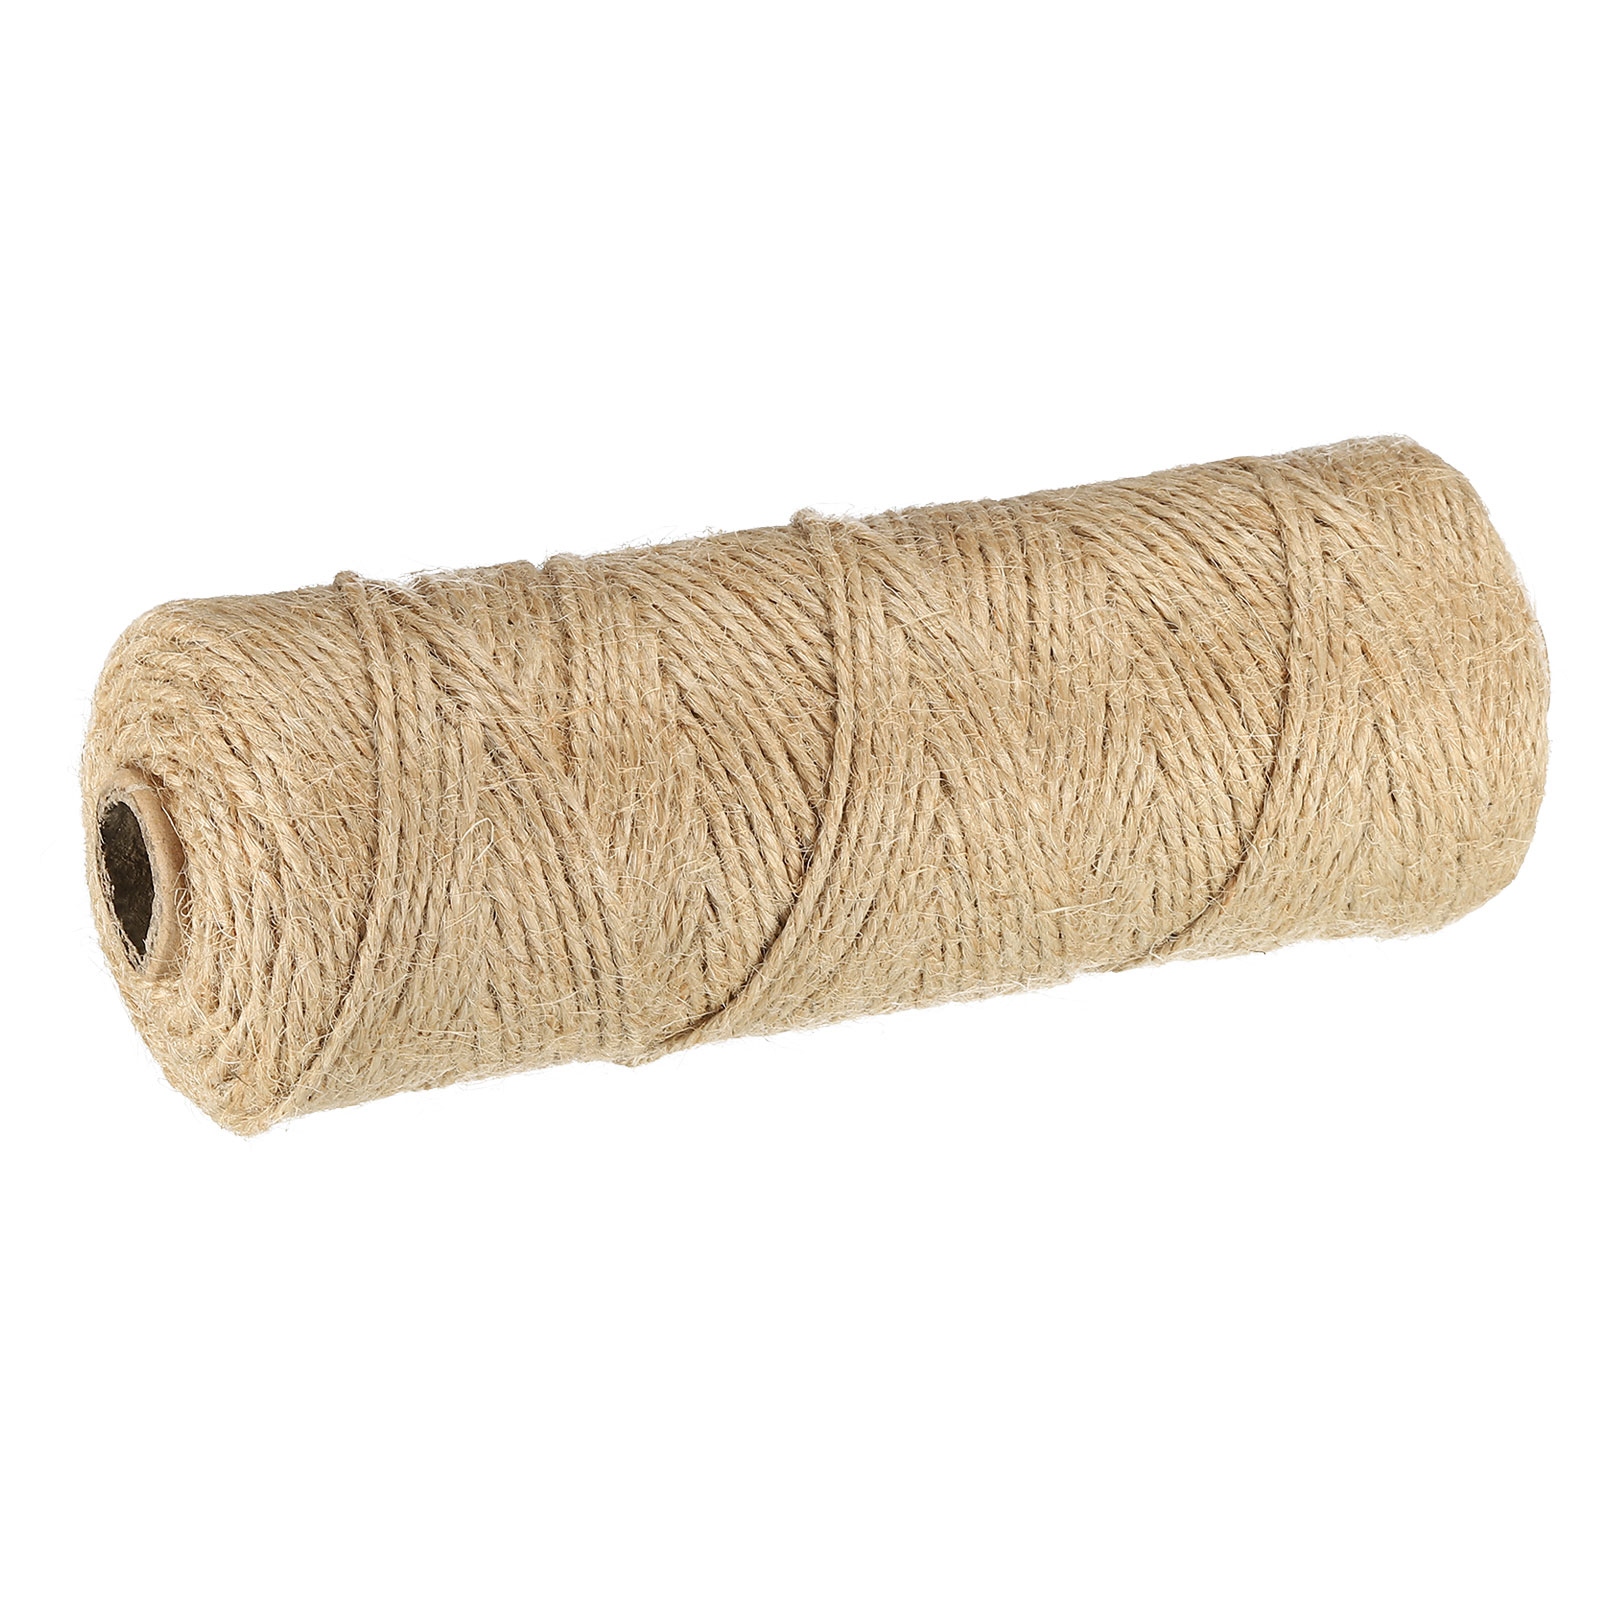 Jute Twine 2mm, 328 Feet Long Brown Twine Rope for DIY Subjects